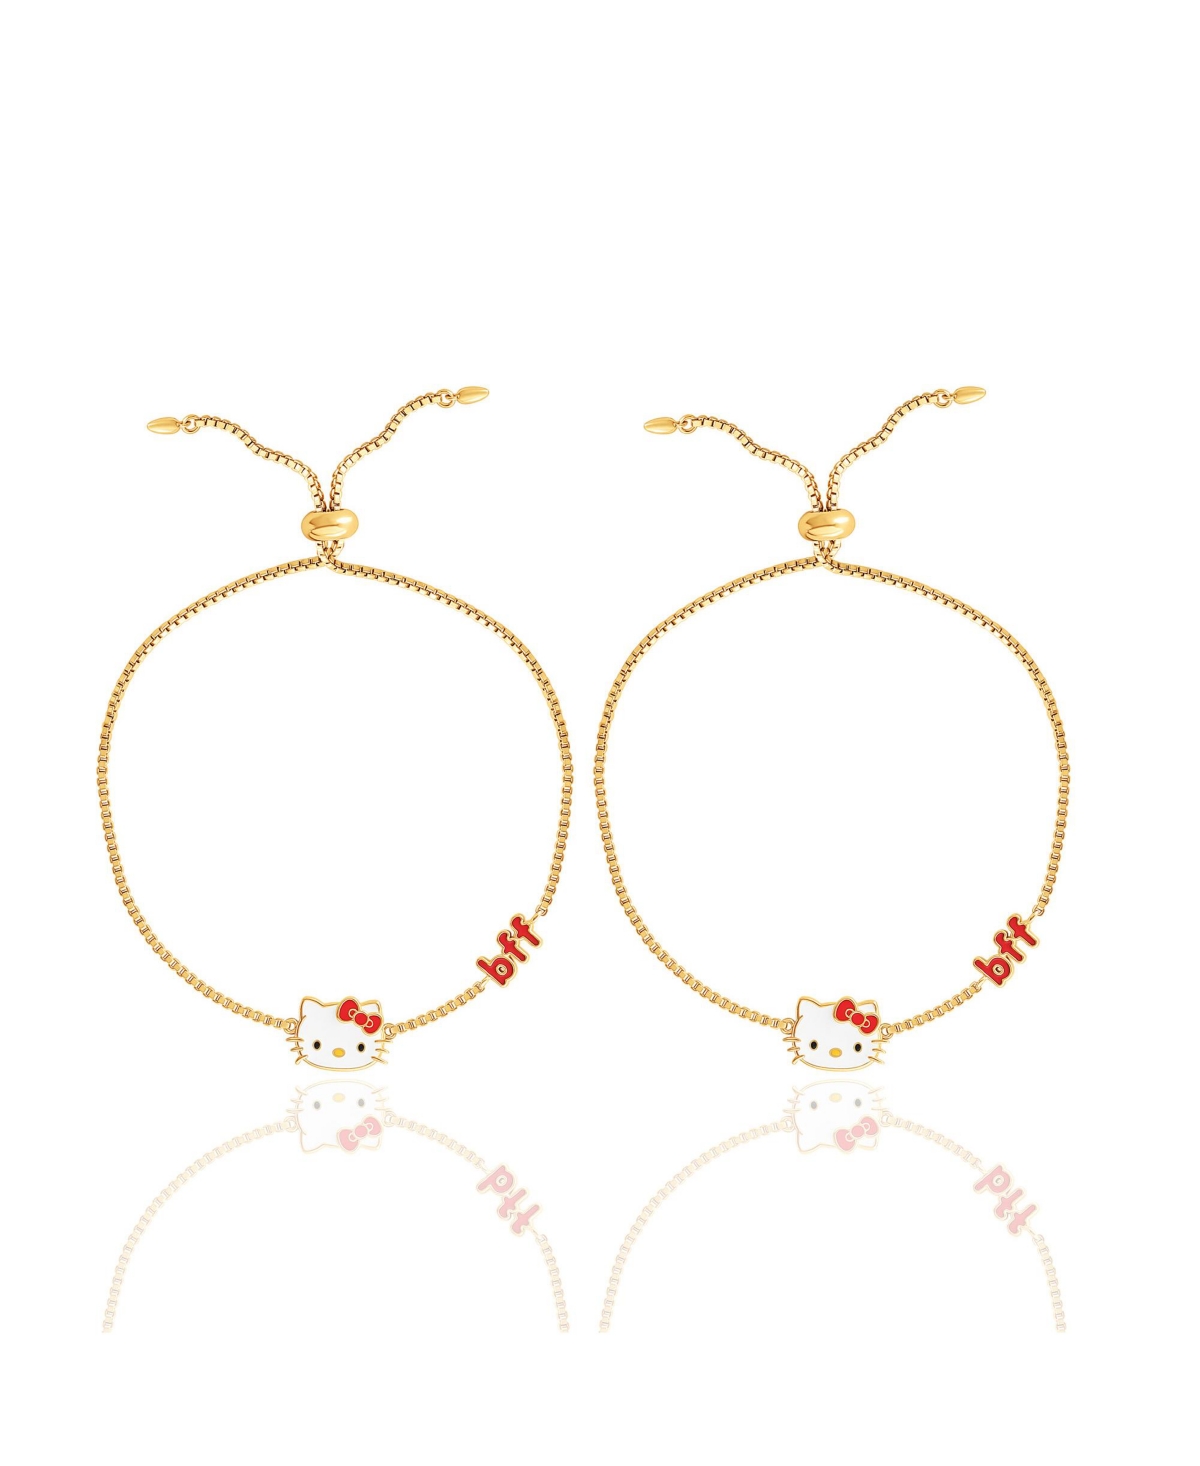 Sanrio Bff Bracelets Gold Plated Best Friends Lariat Bracelets - Set of 2, Officially Licensed Authentic - Gold tone red